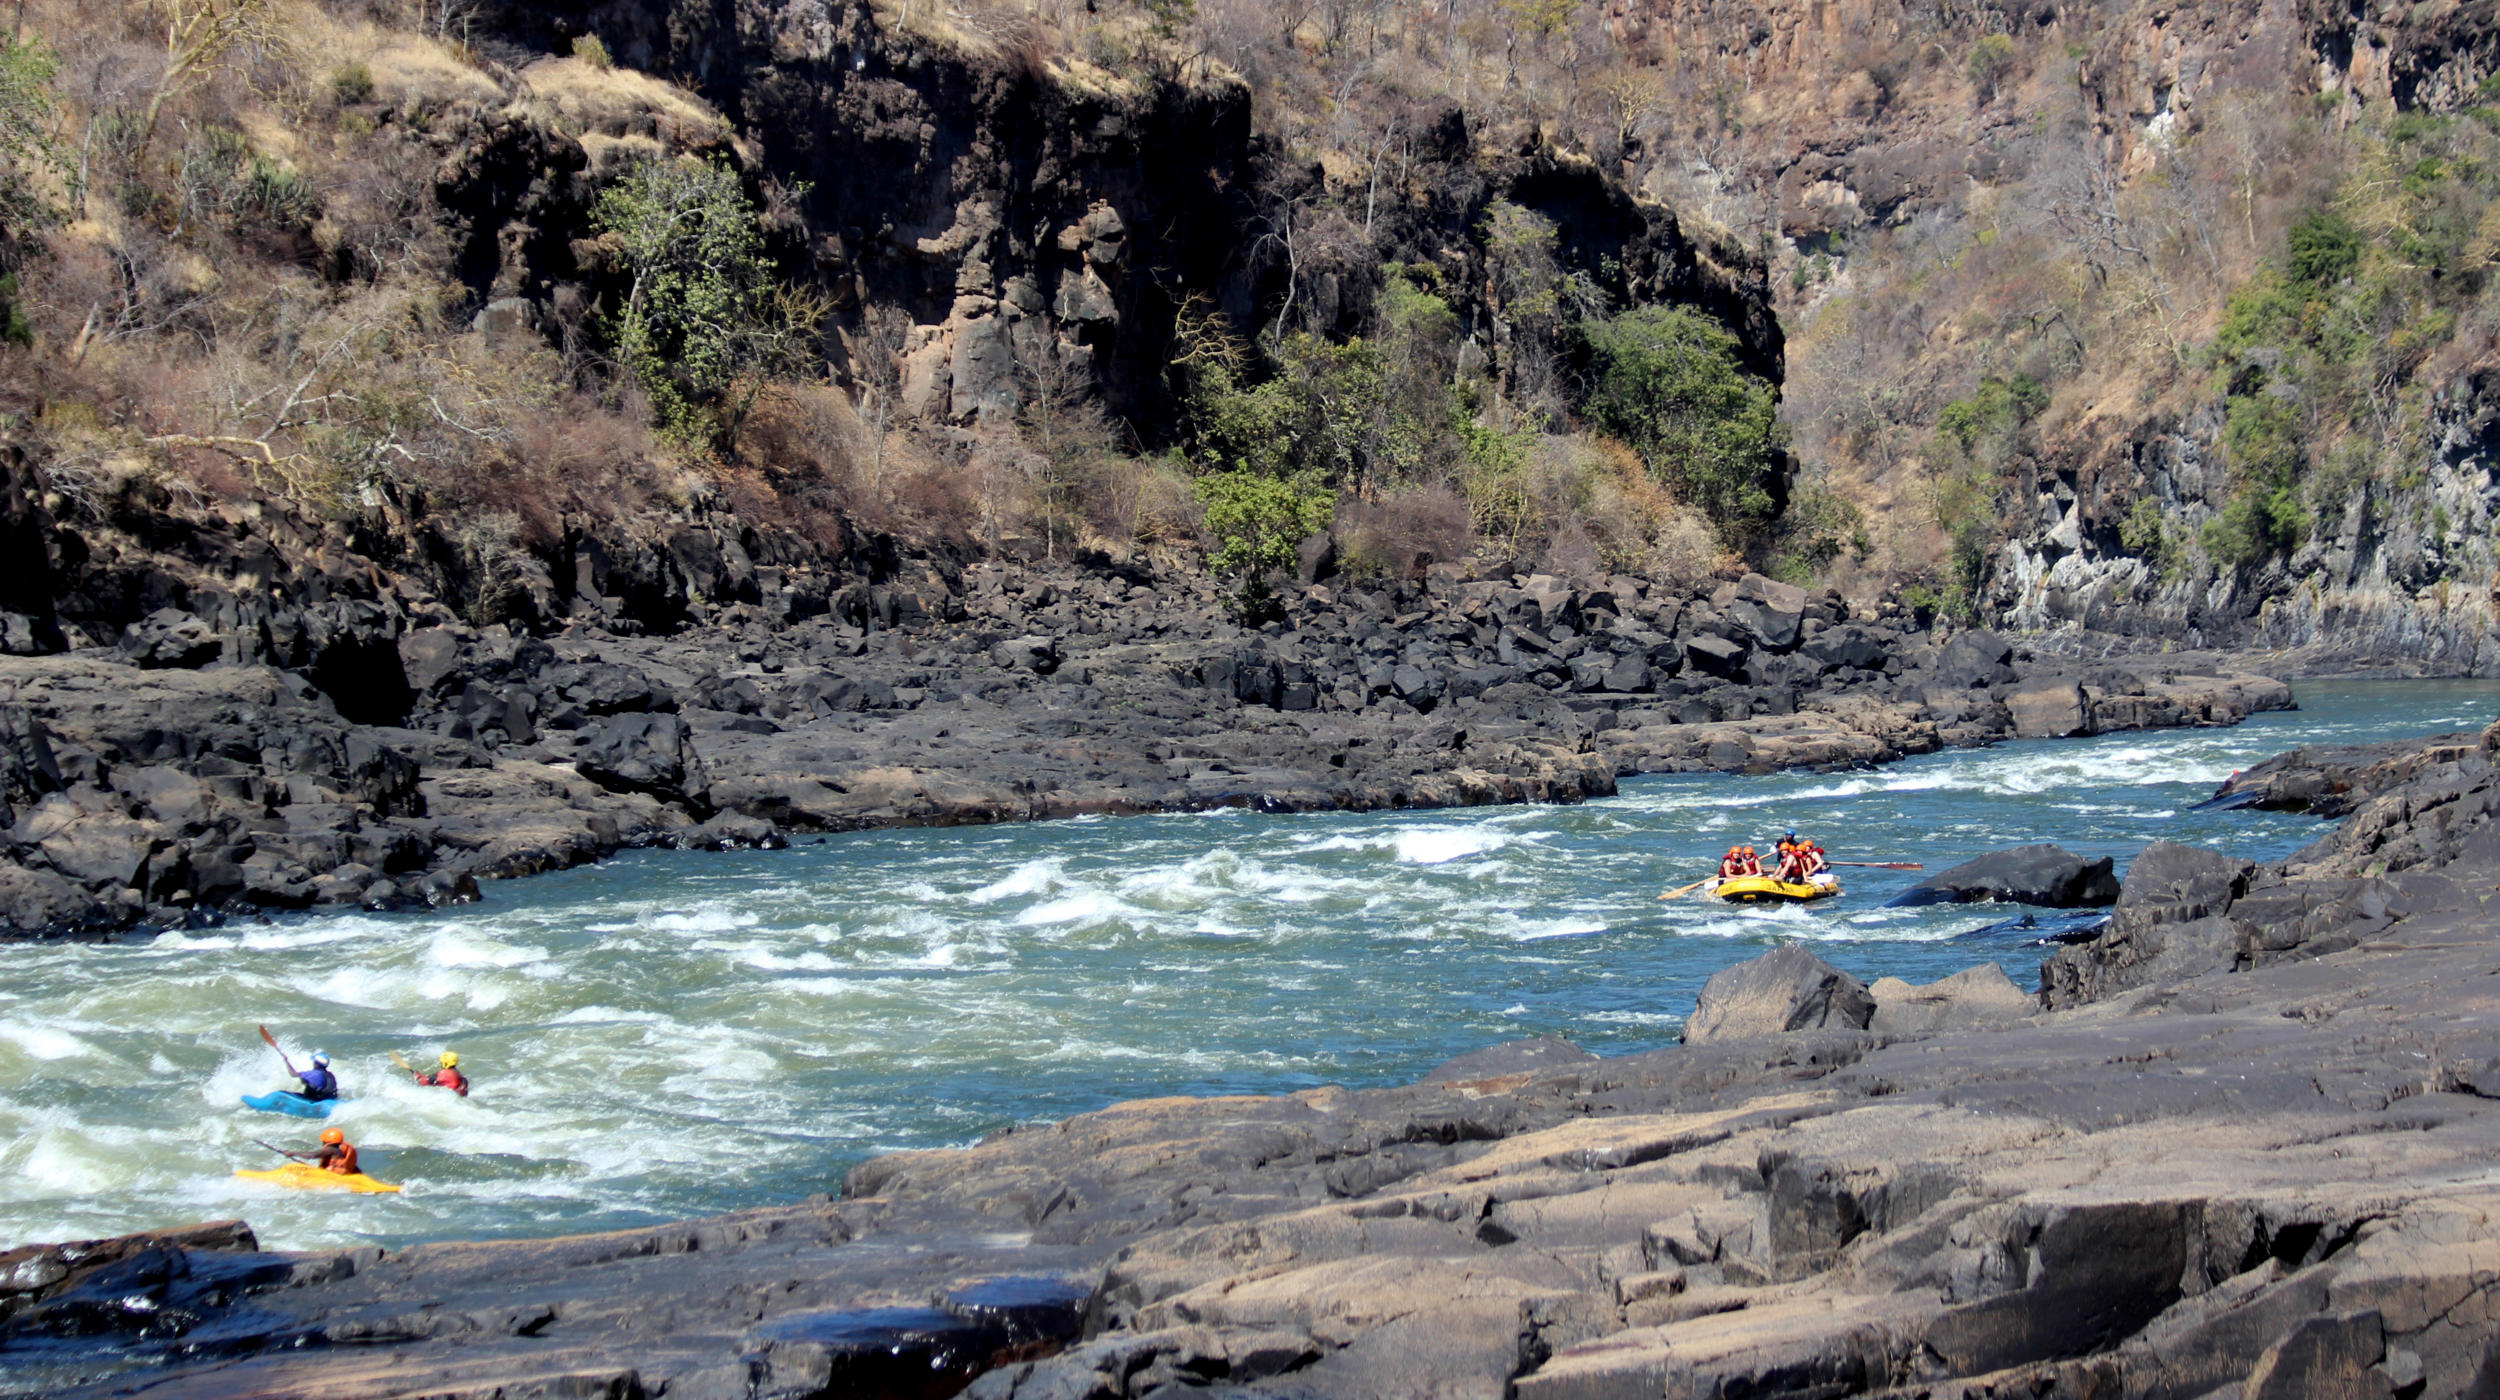 Visitors enjoying the white water rafting experience at Victoria Falls